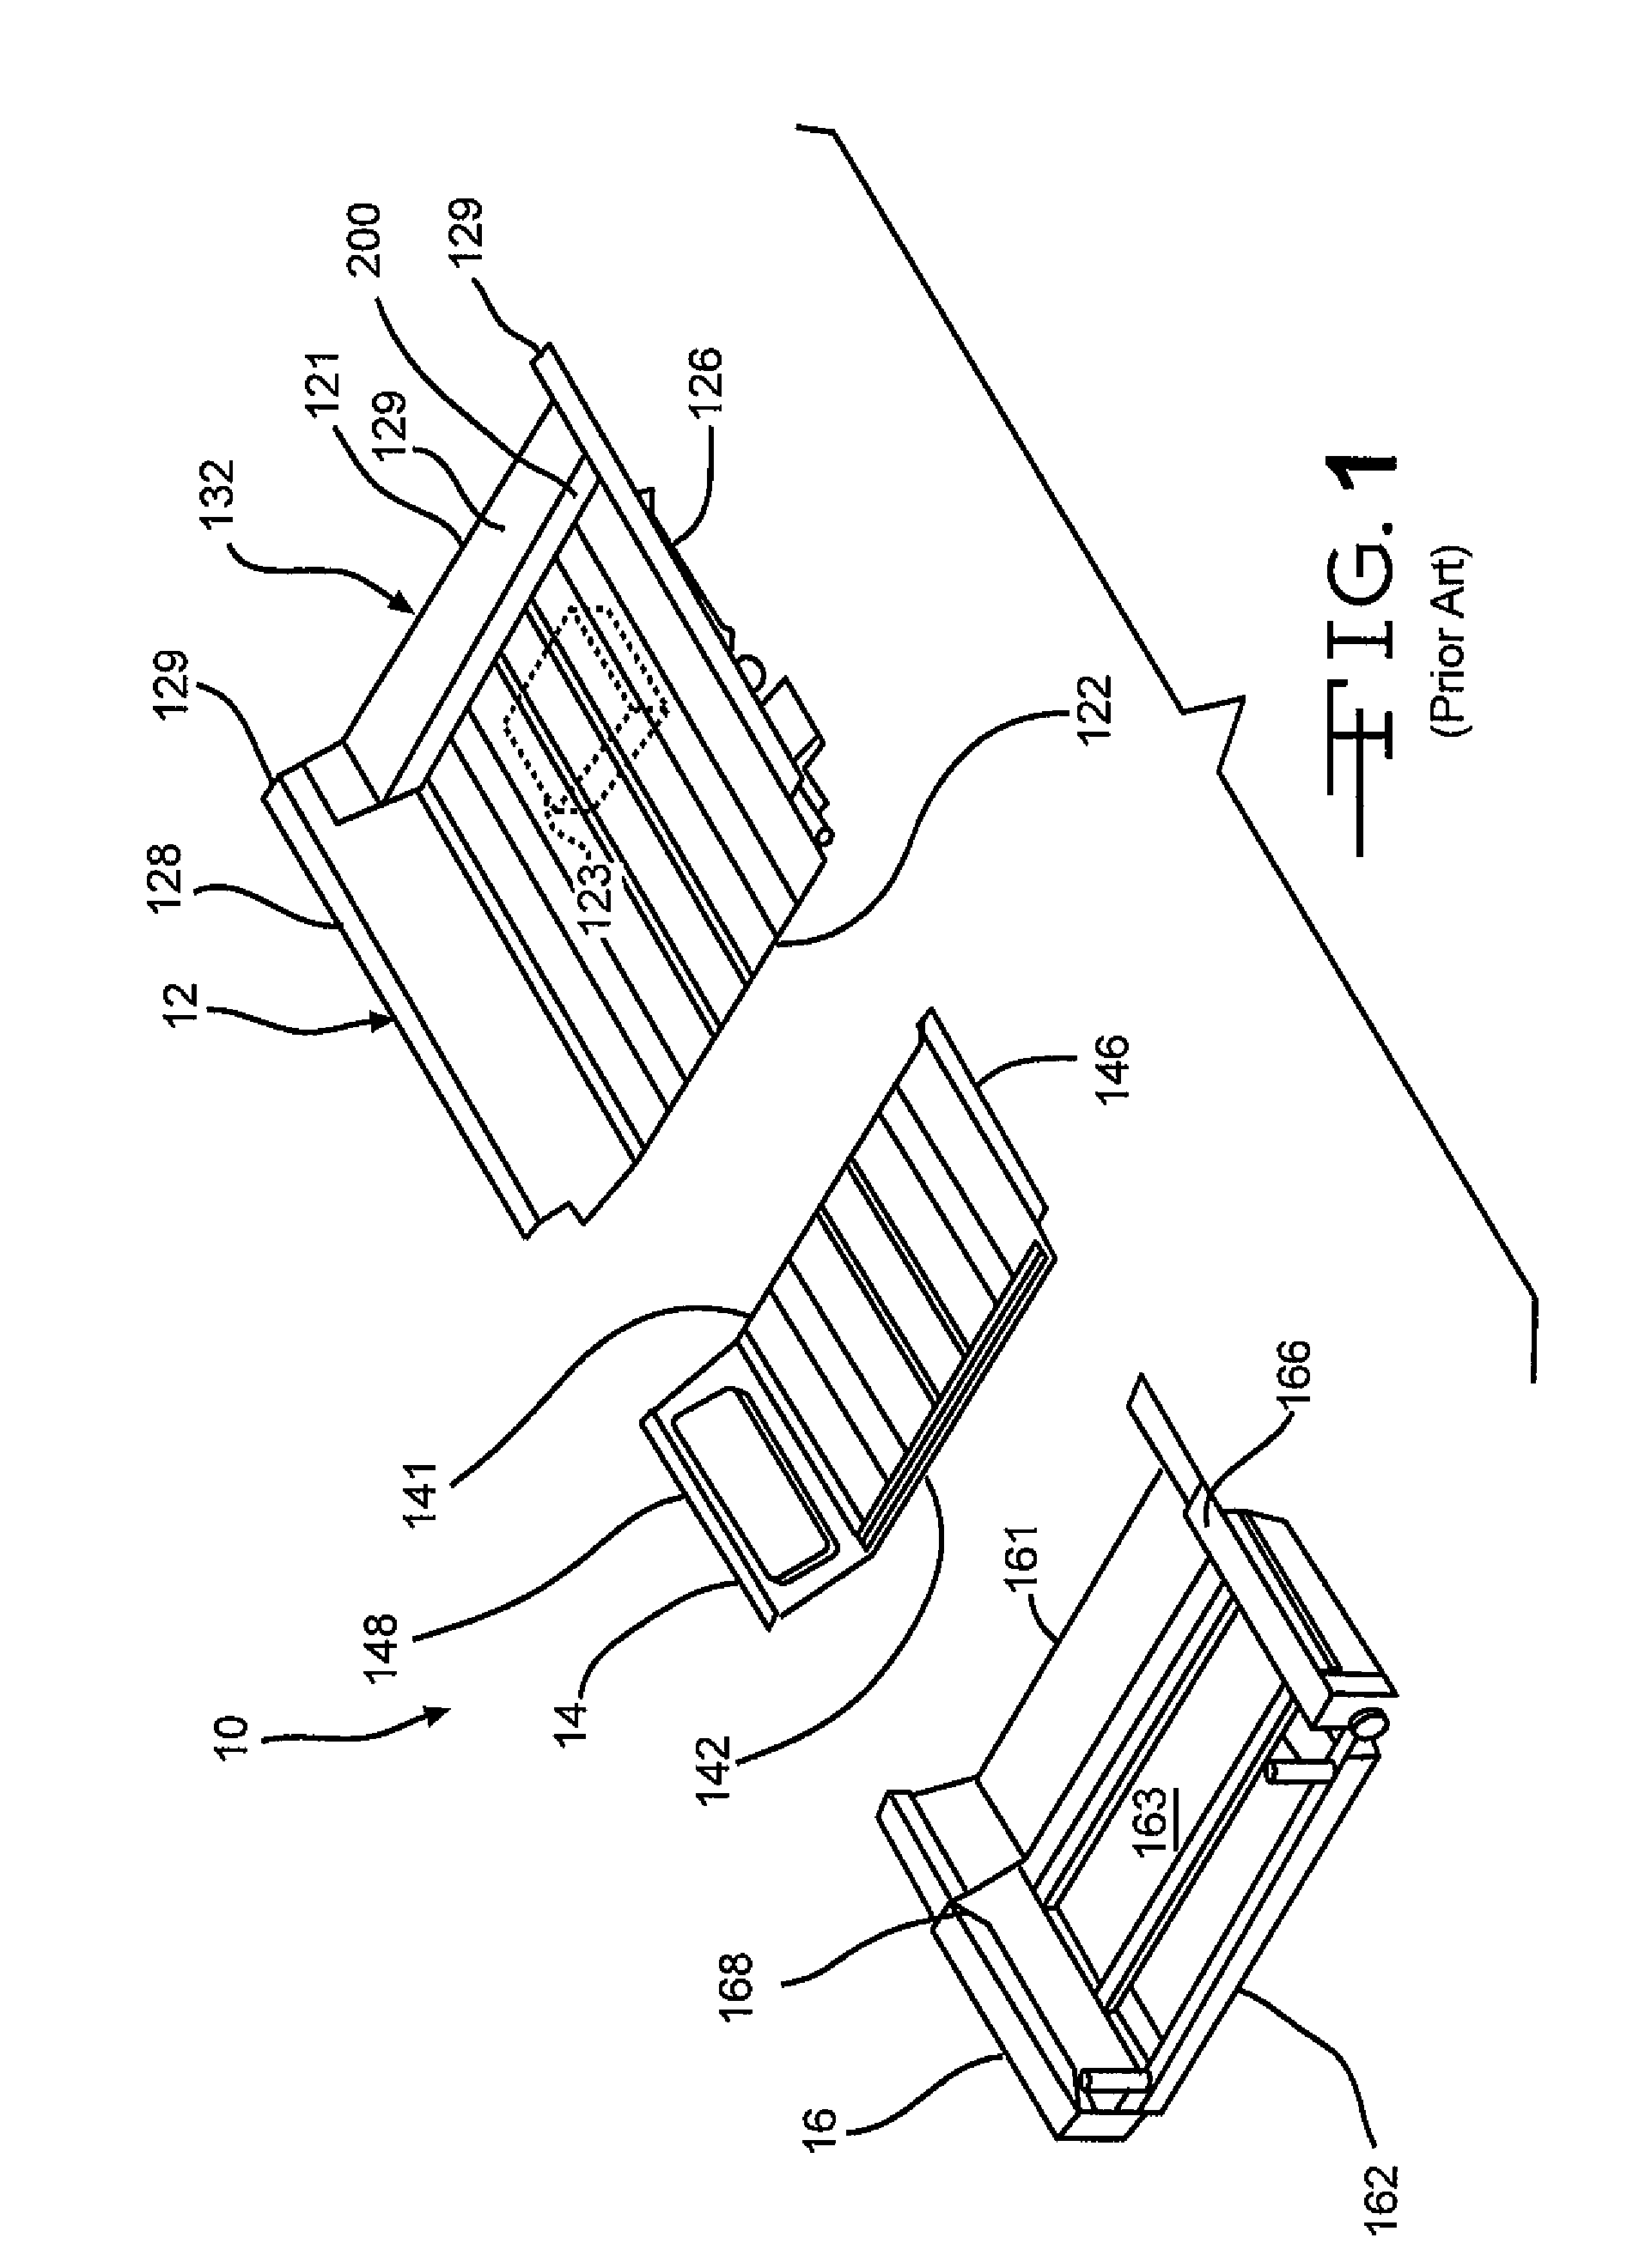 Self-contained gatching, rotating and adjustable foot section mattress